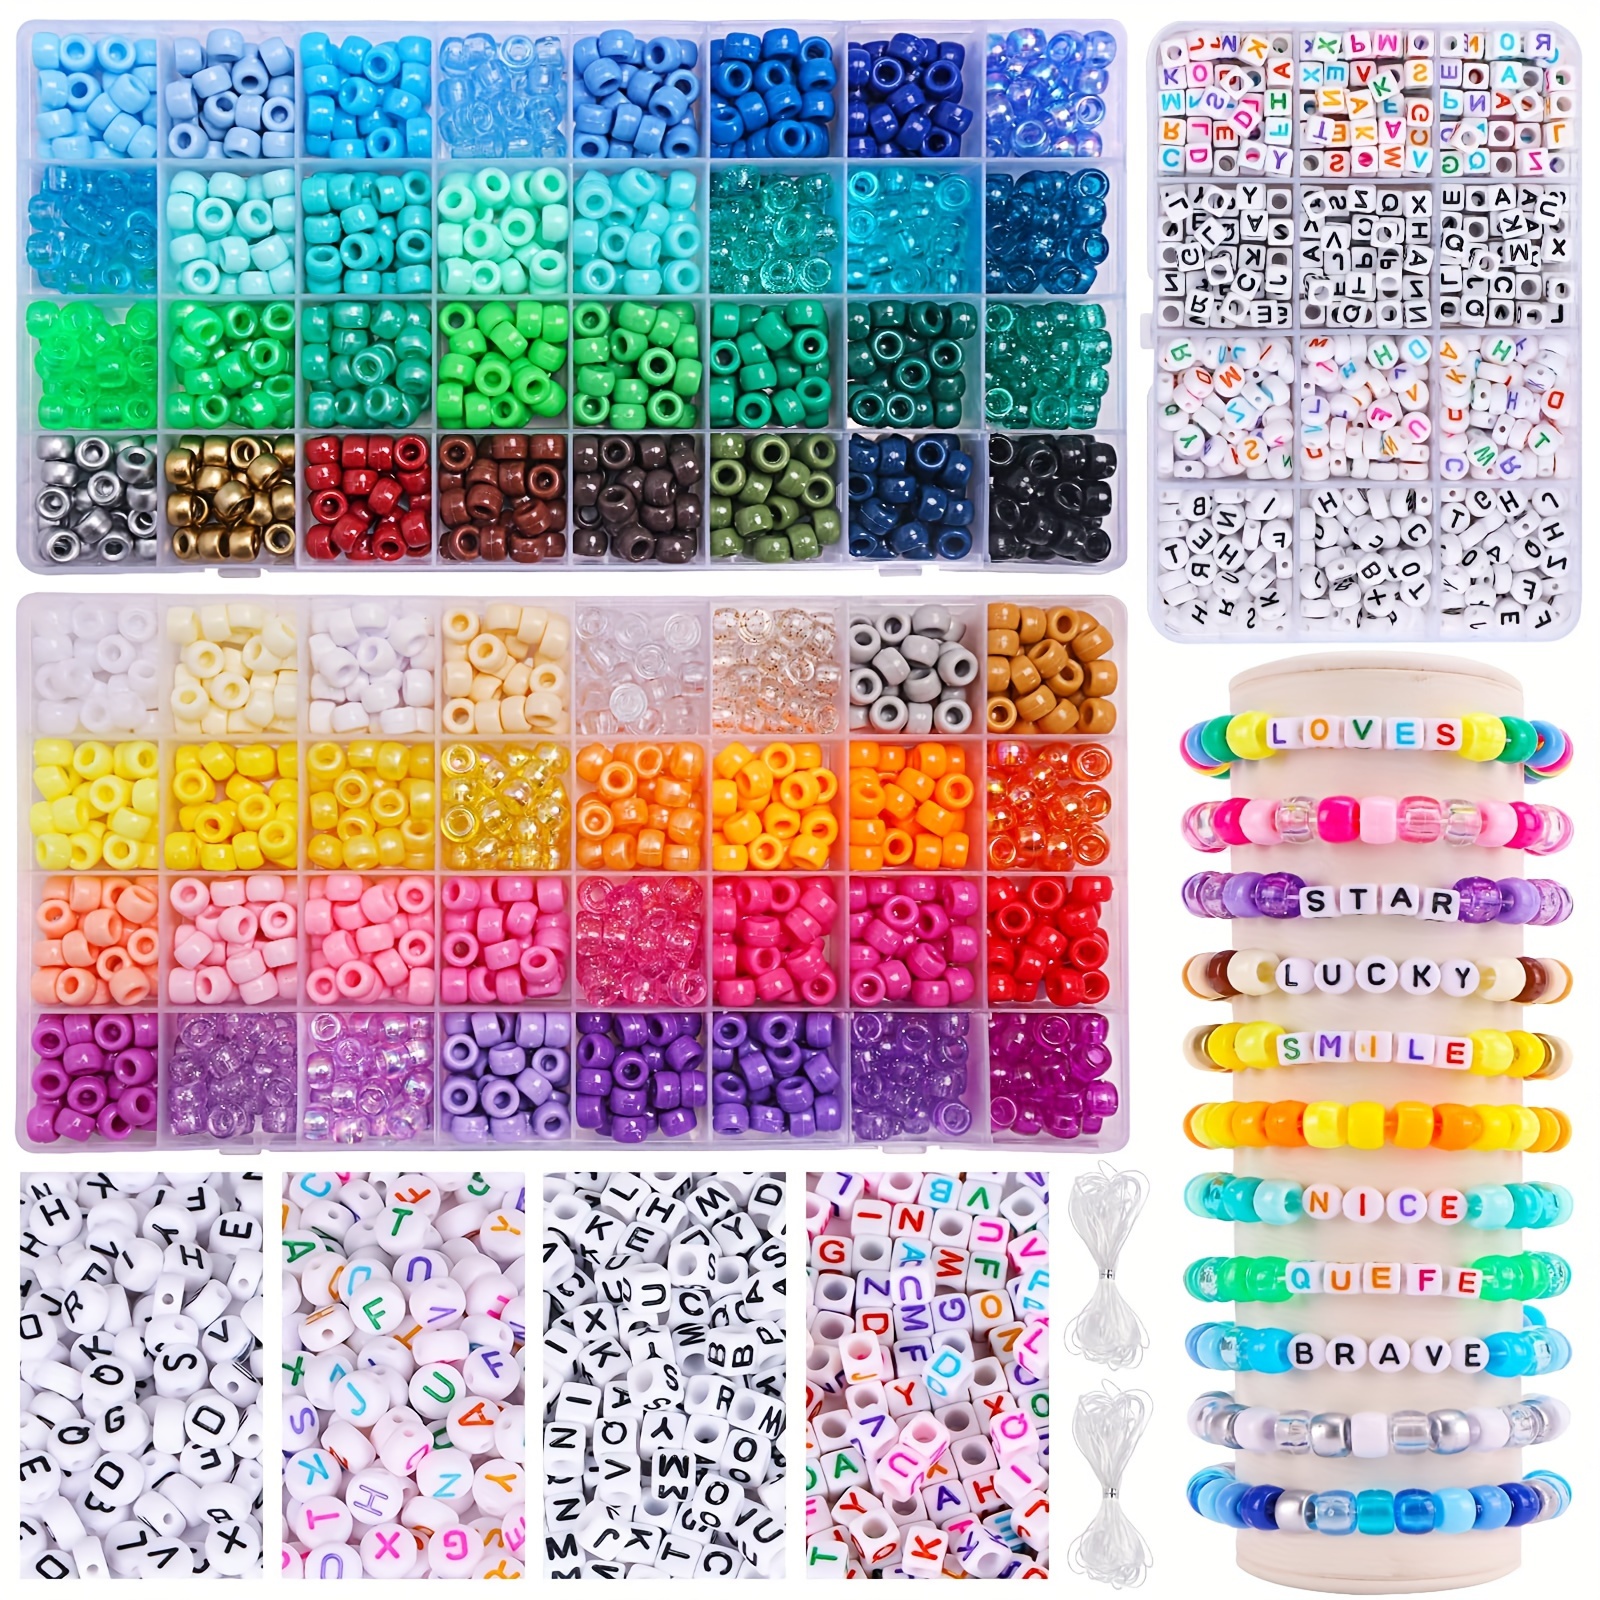 Quefe 3960pcs Pony Beads for Friendship Bracelet Making Kit 48 Colors Kandi  Beads Set, 2400pcs Plastic Rainbow Bulk and 1560pcs Letter Beads with 20  Meter Elastic Threads for Craft Jewelry Necklace